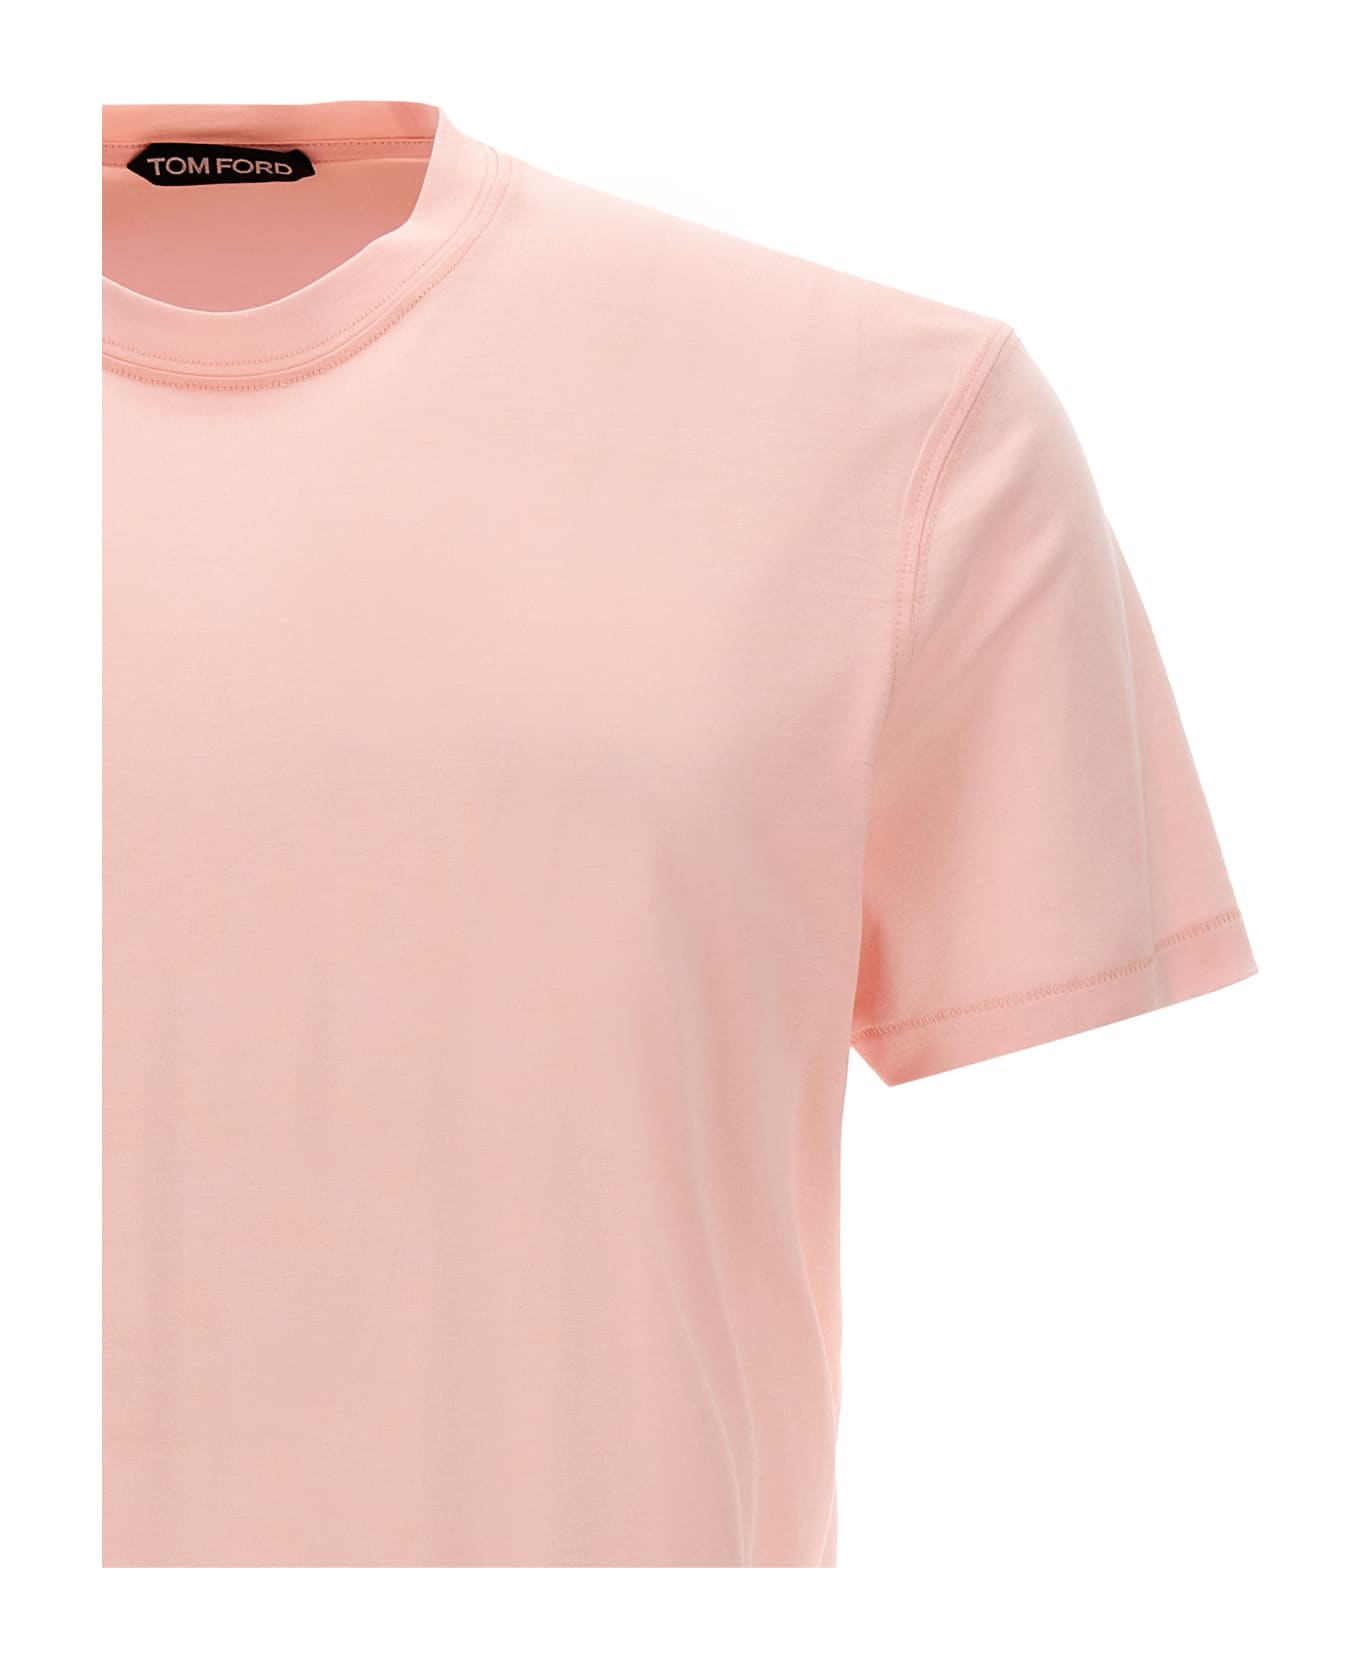 Tom Ford Lyoncell T-shirt - Pink シャツ